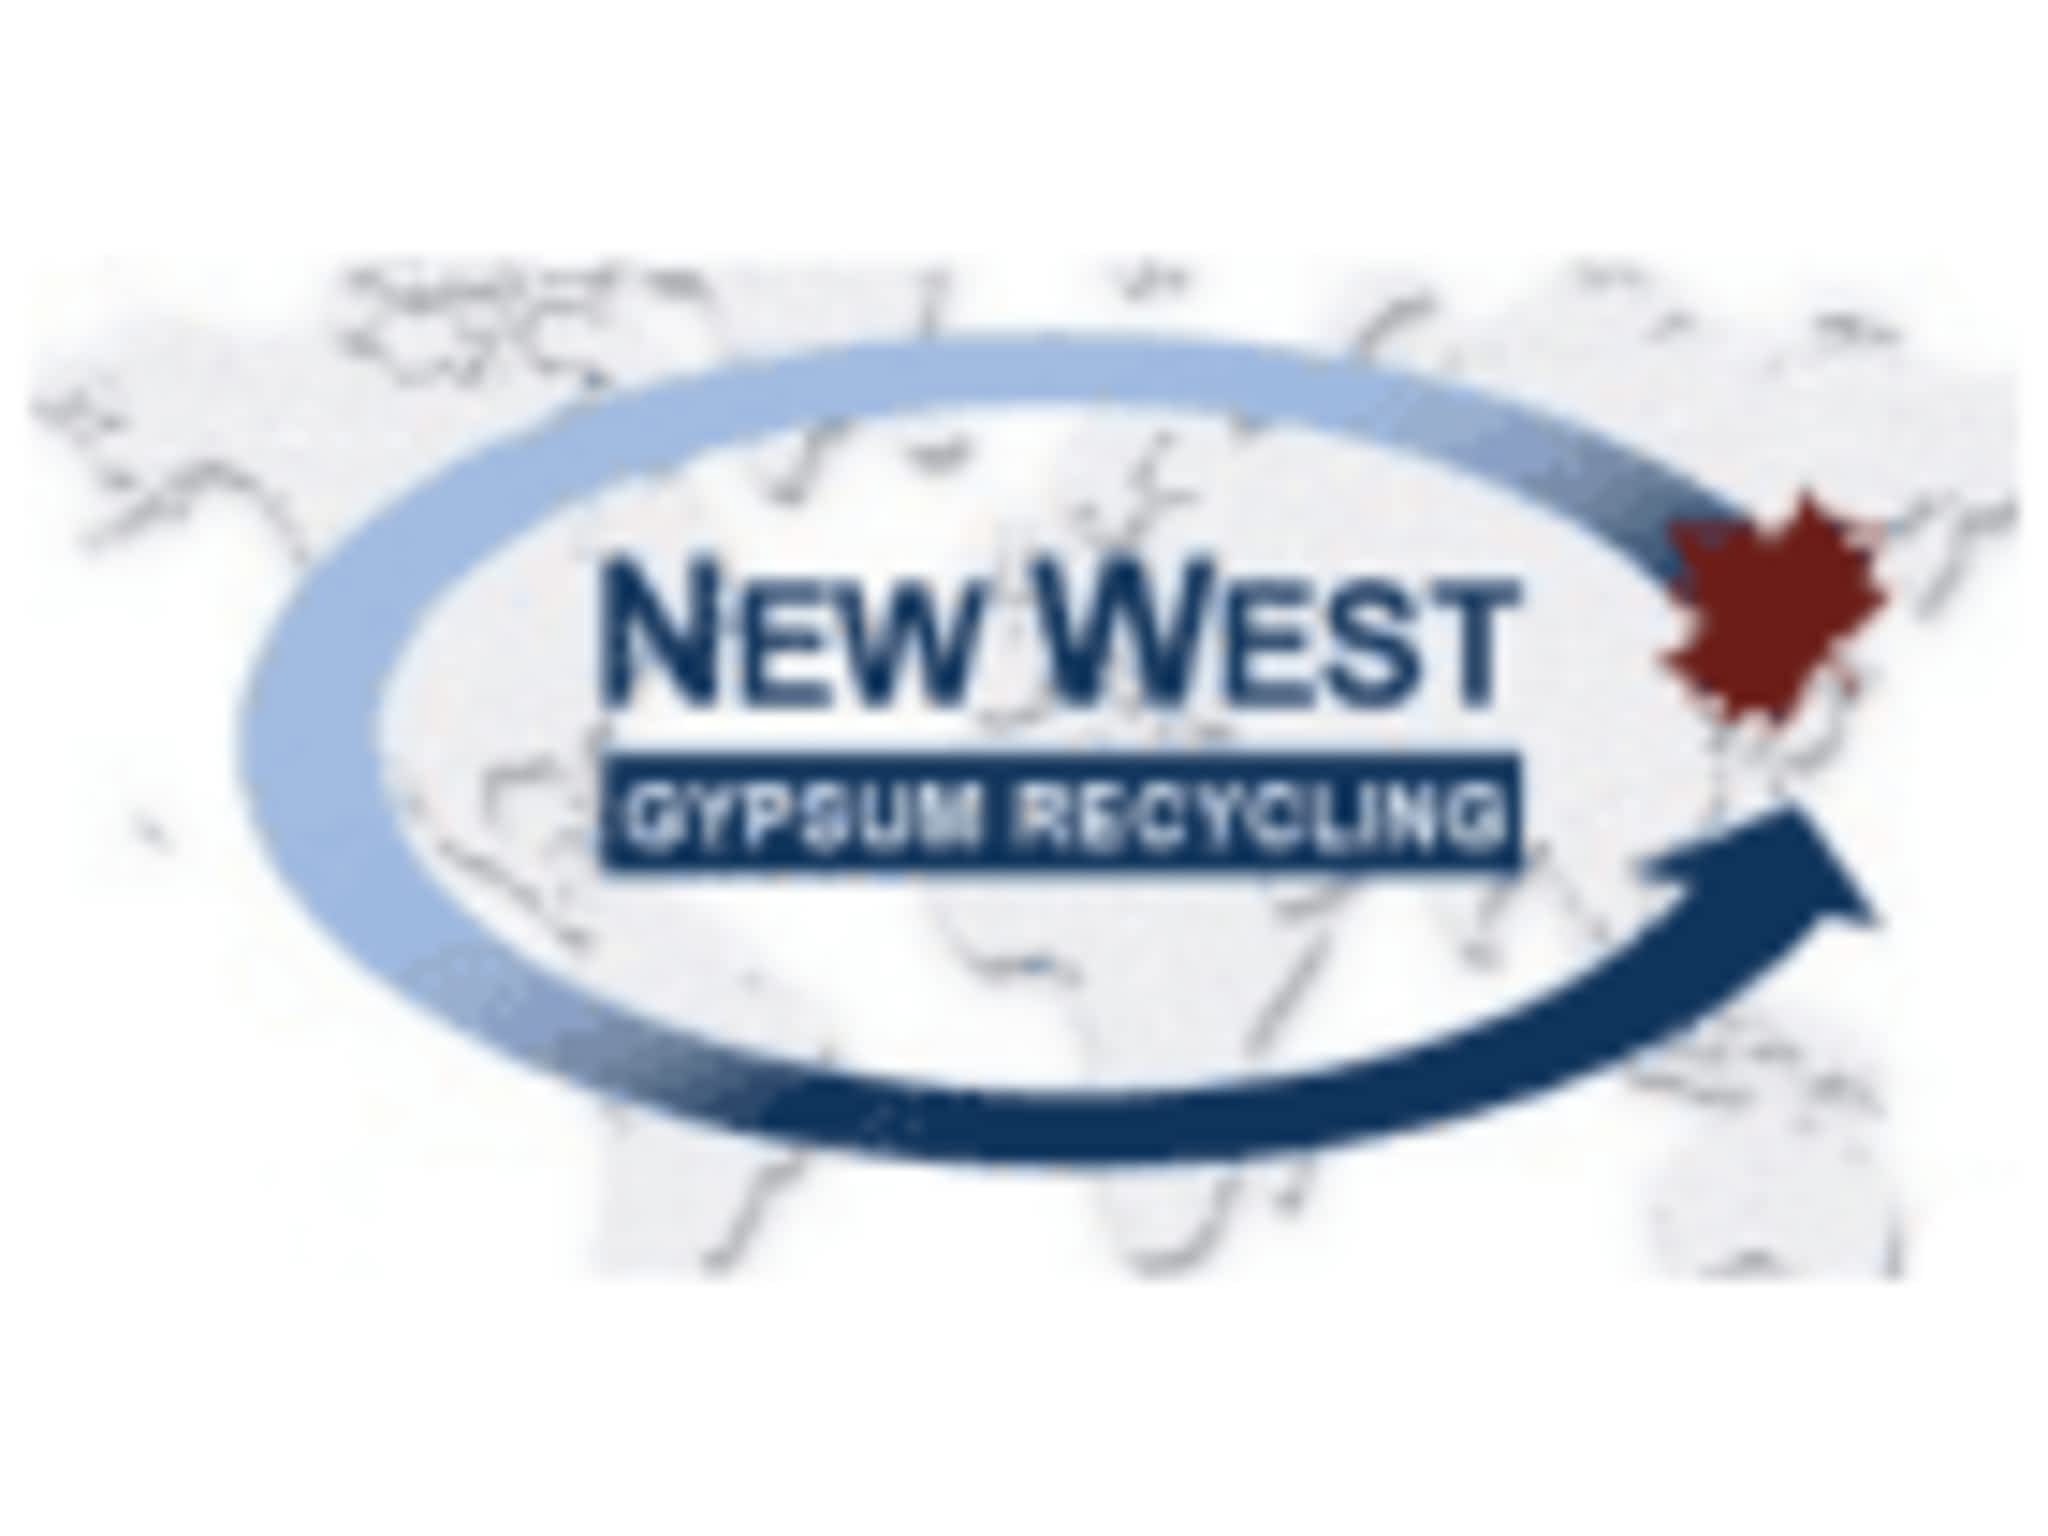 photo New West Gypsum Recycling (BC) Inc